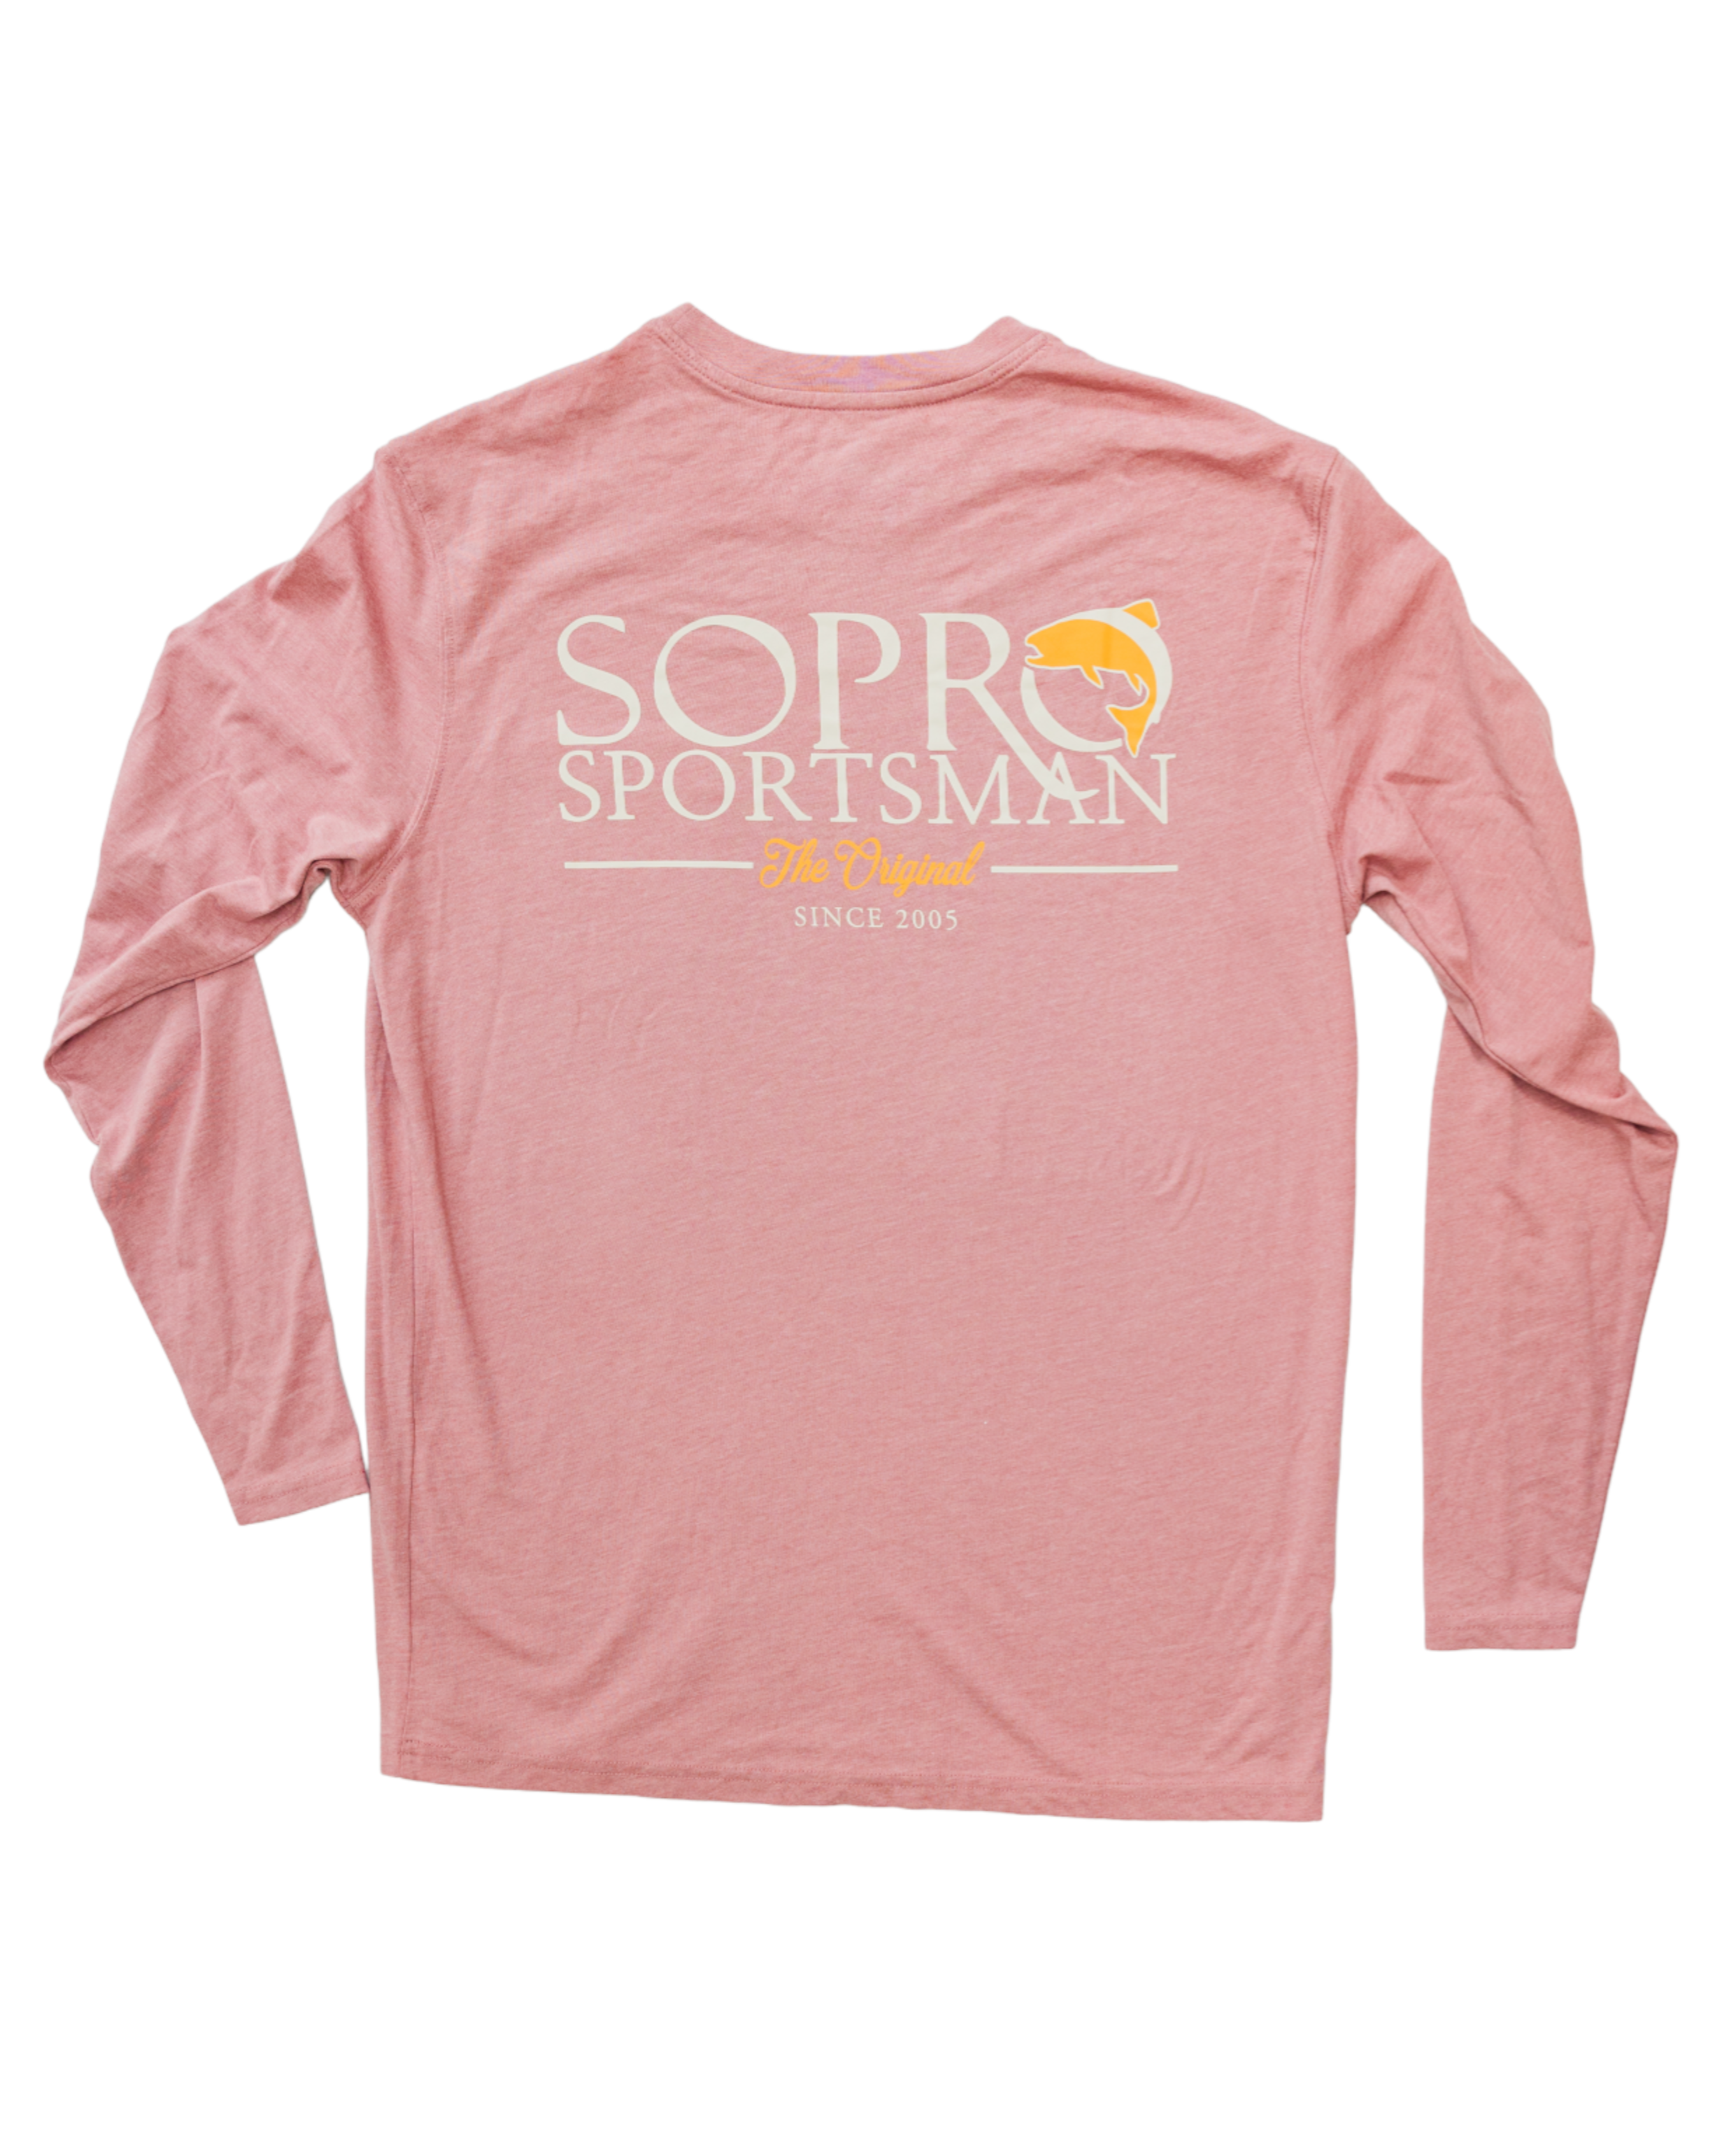 Wholesale SoPro Sportsman LS Tee for your store - Faire